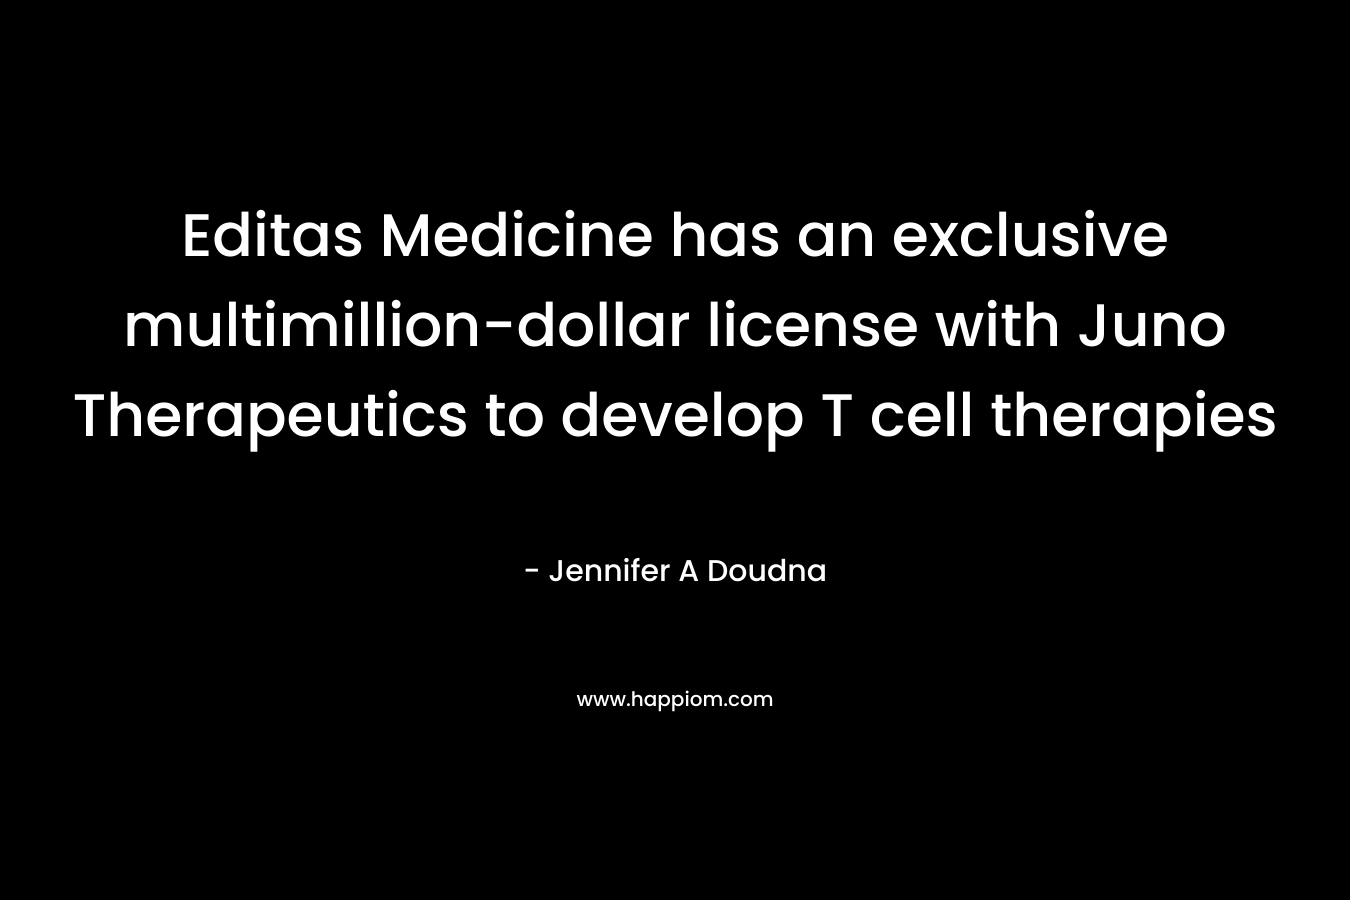 Editas Medicine has an exclusive multimillion-dollar license with Juno Therapeutics to develop T cell therapies